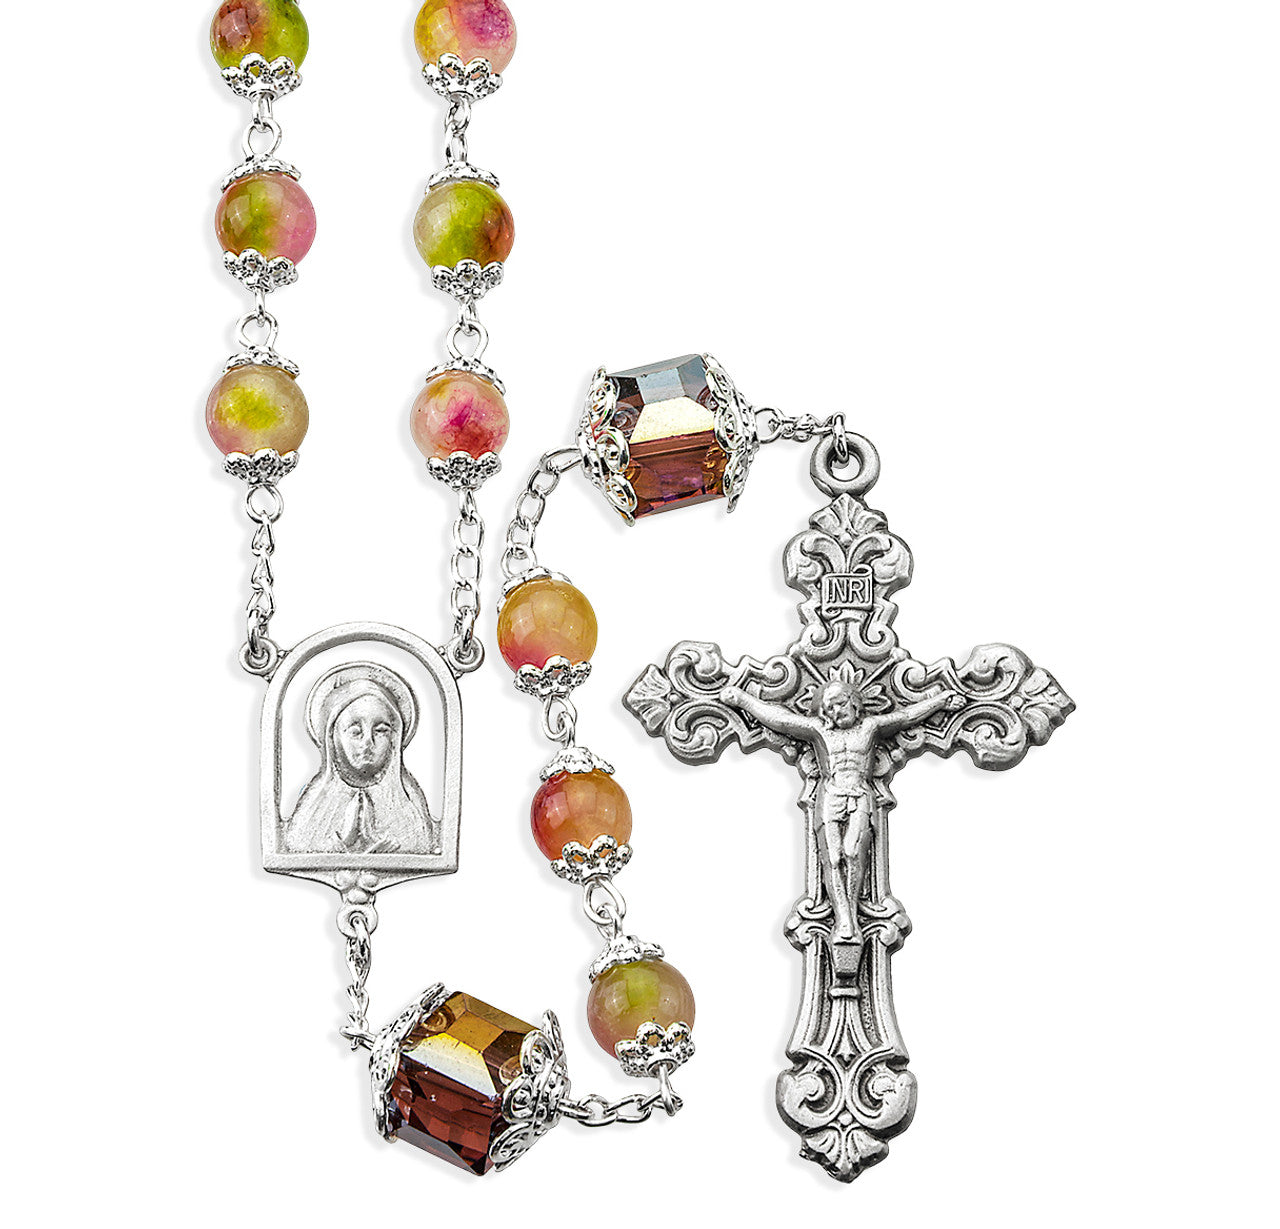 Multicolor double capped rose glass bead rosary/Pewter